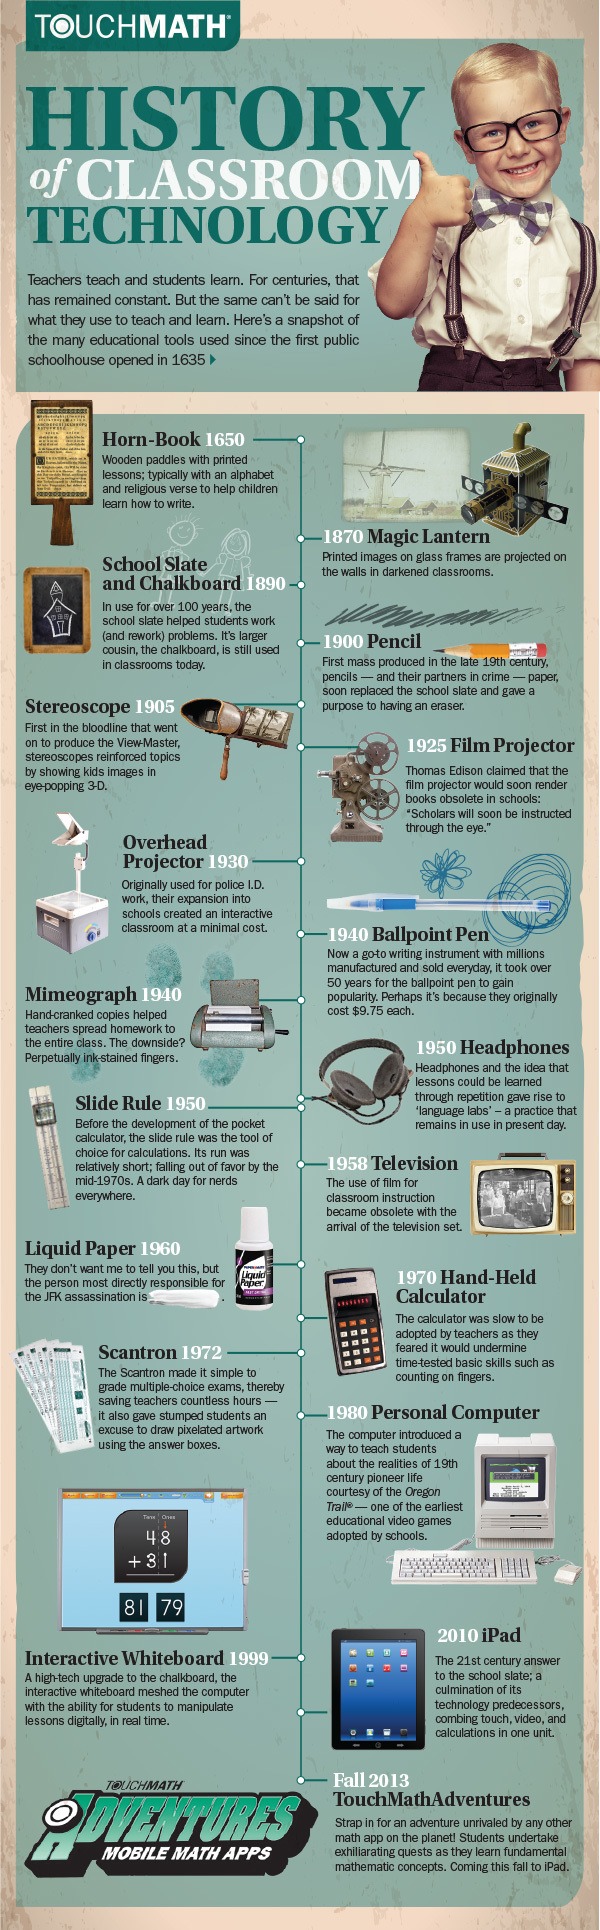 The History of Classroom Technology Infographic